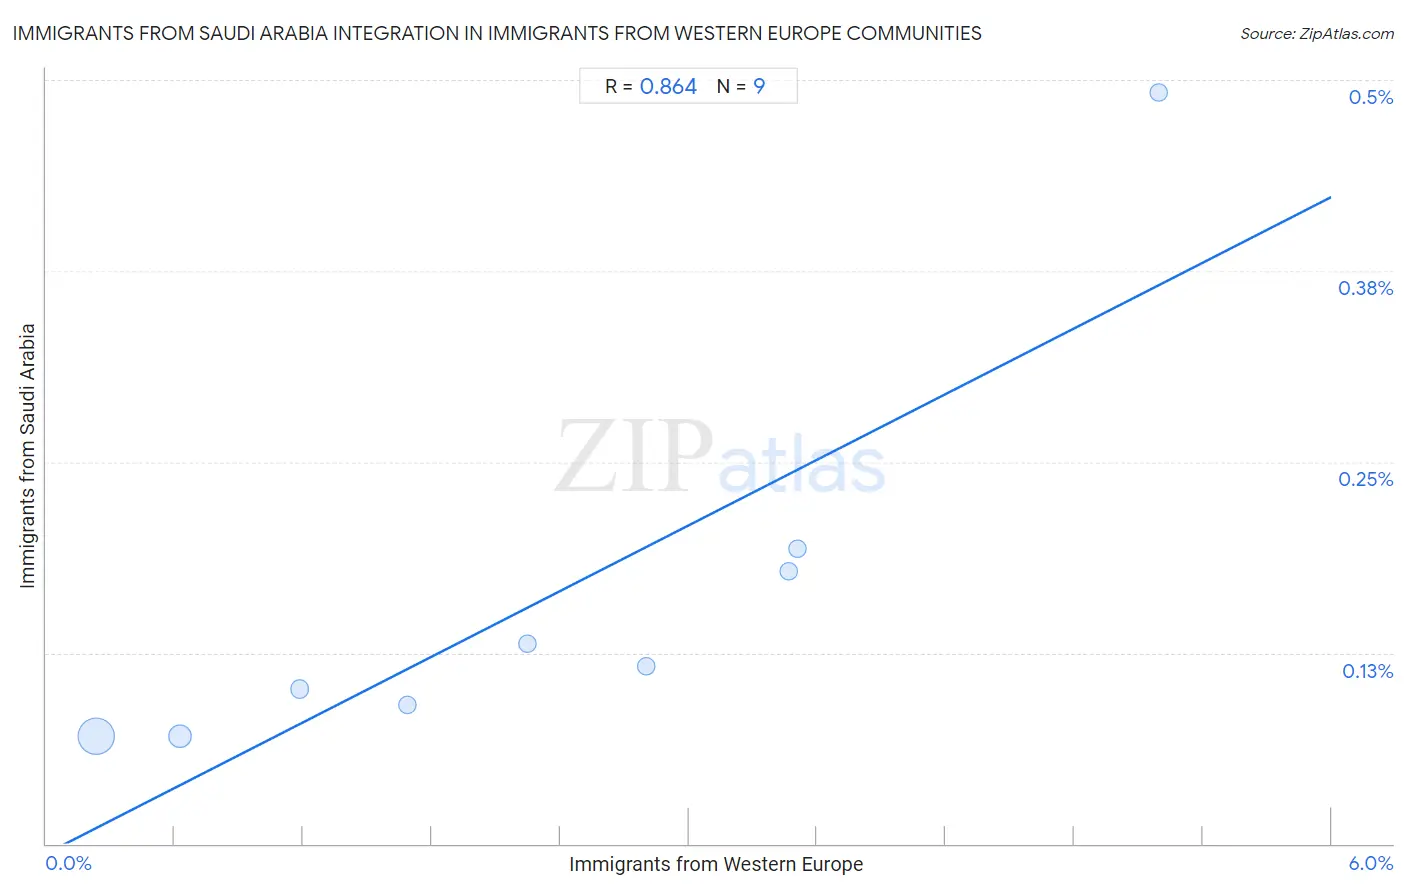 Immigrants from Western Europe Integration in Immigrants from Saudi Arabia Communities